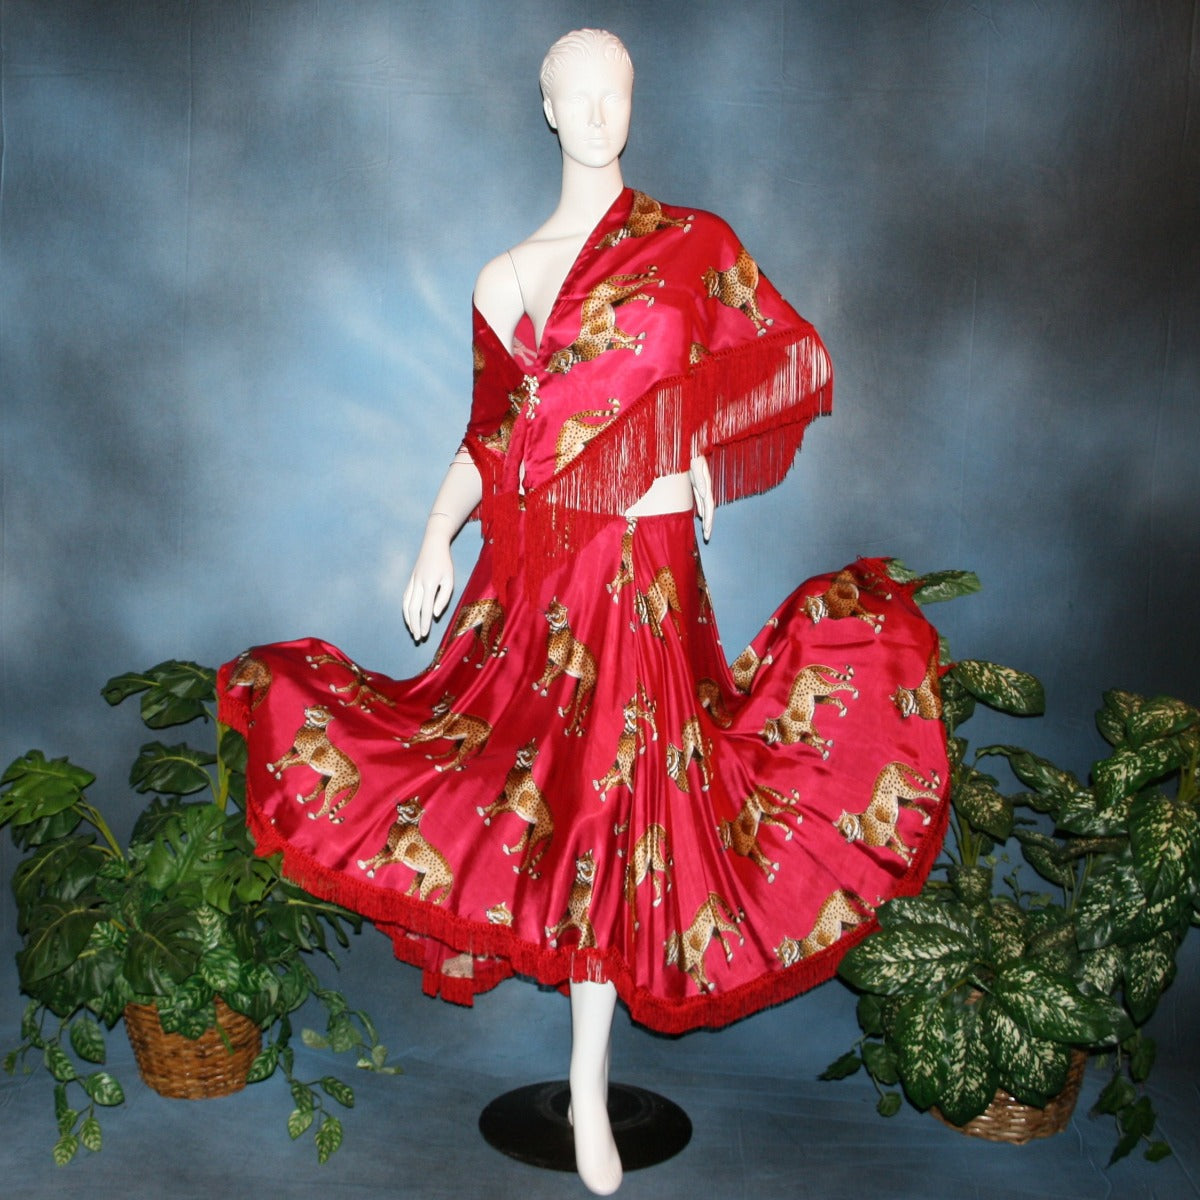 Crystal's Creations red ballroom skirt & shawl created in red satin with cheetah print